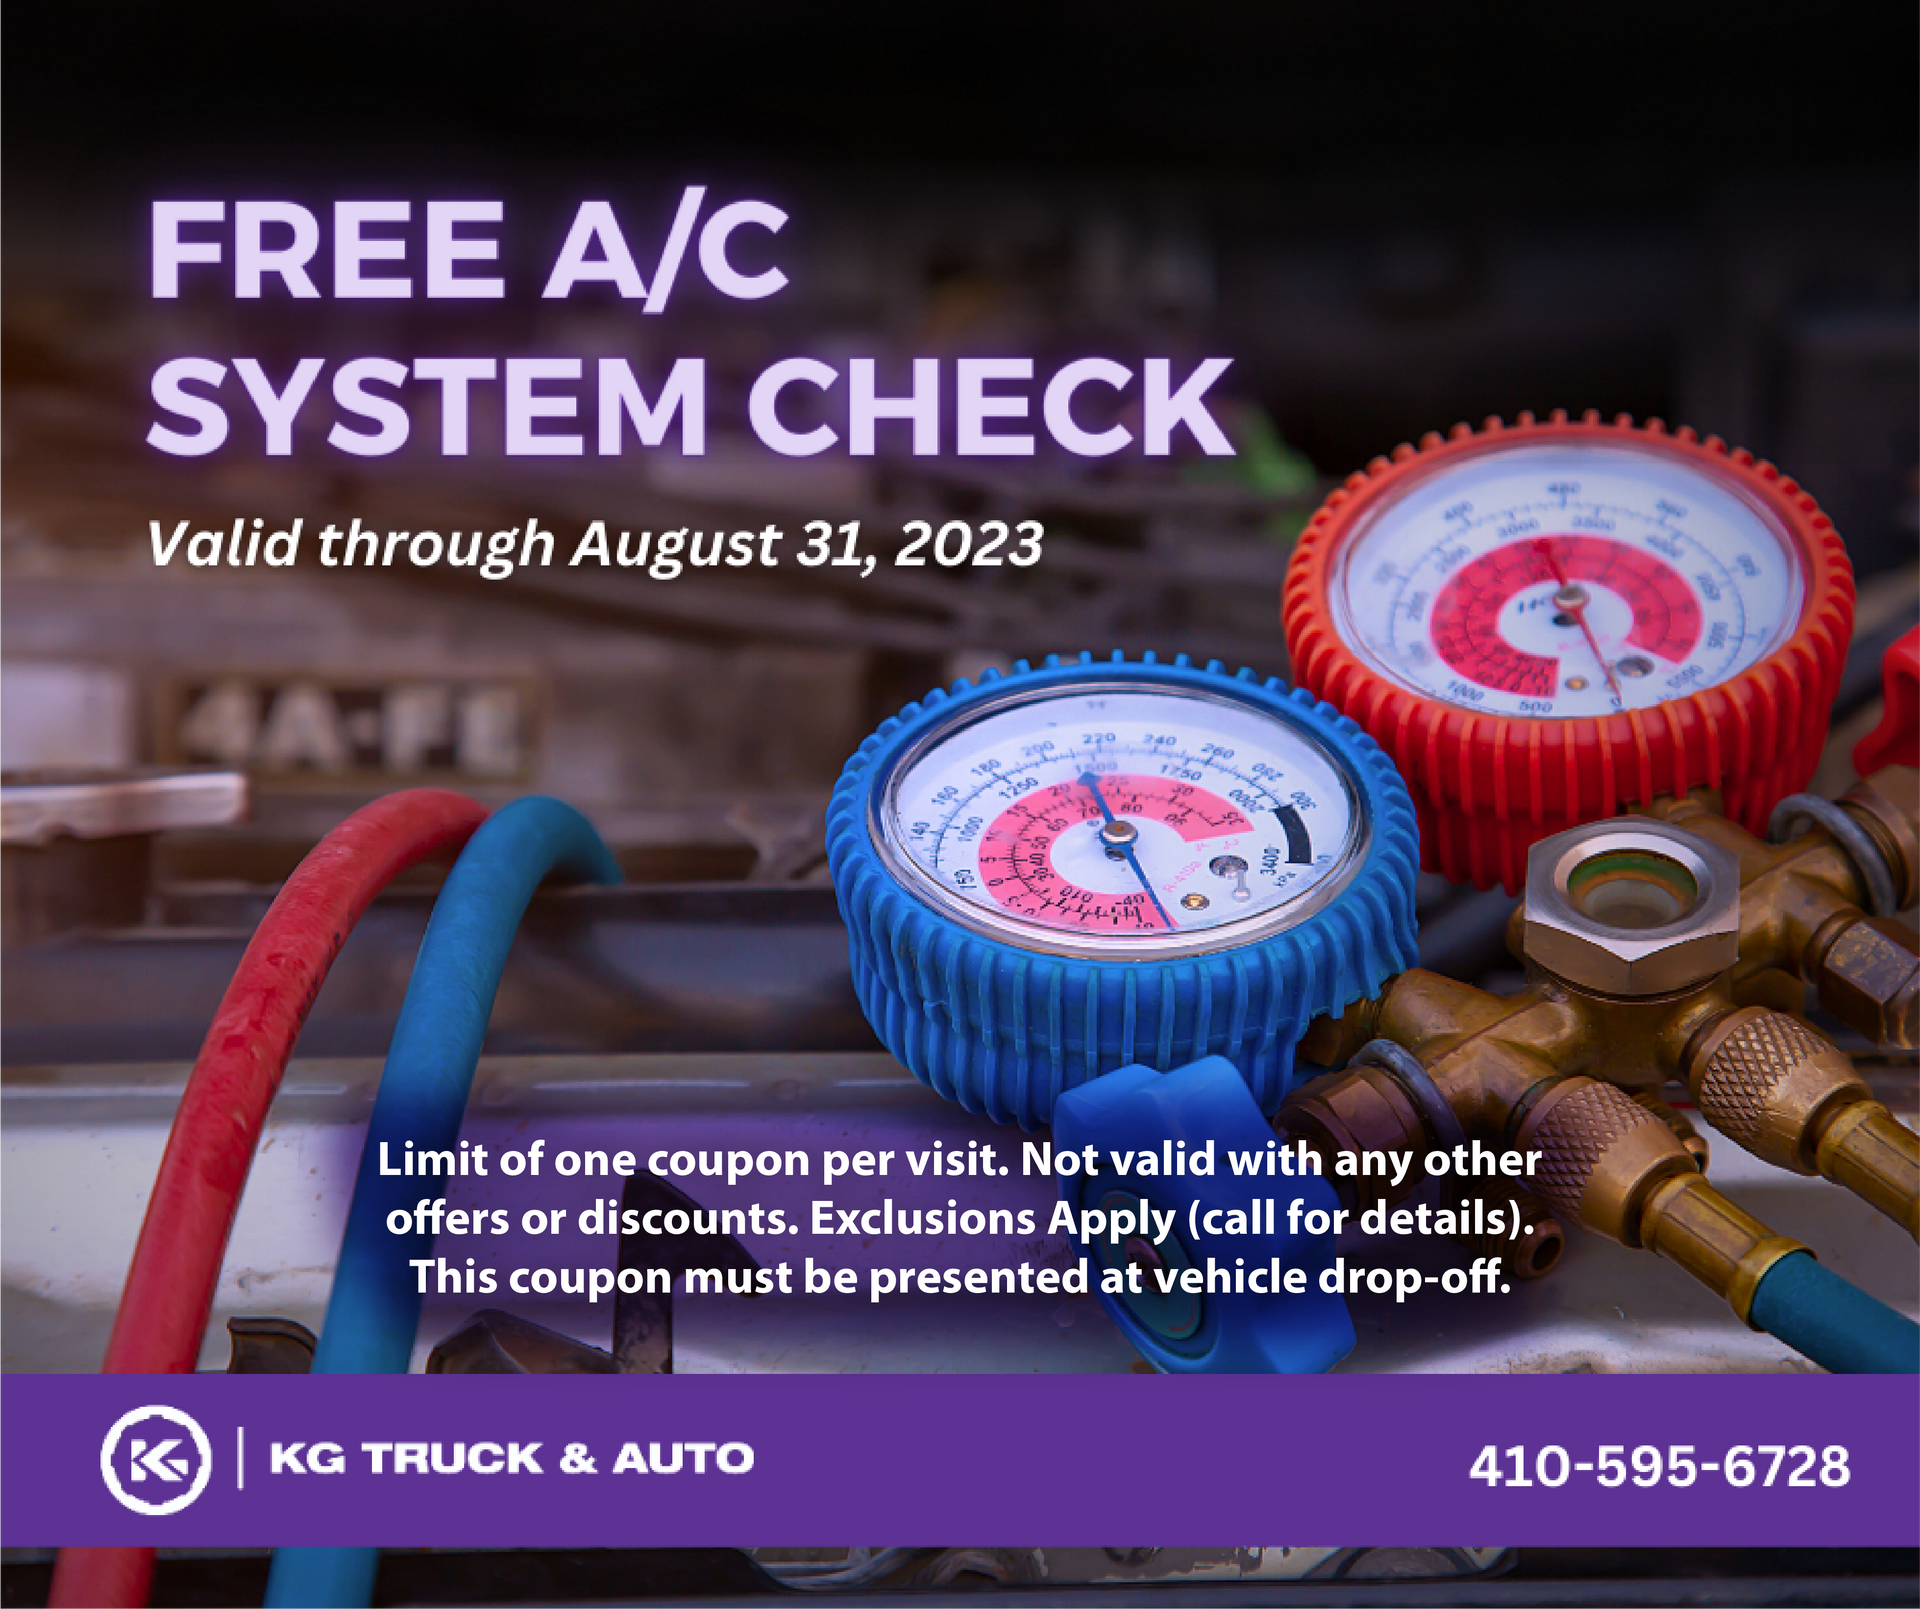 A/C System Check